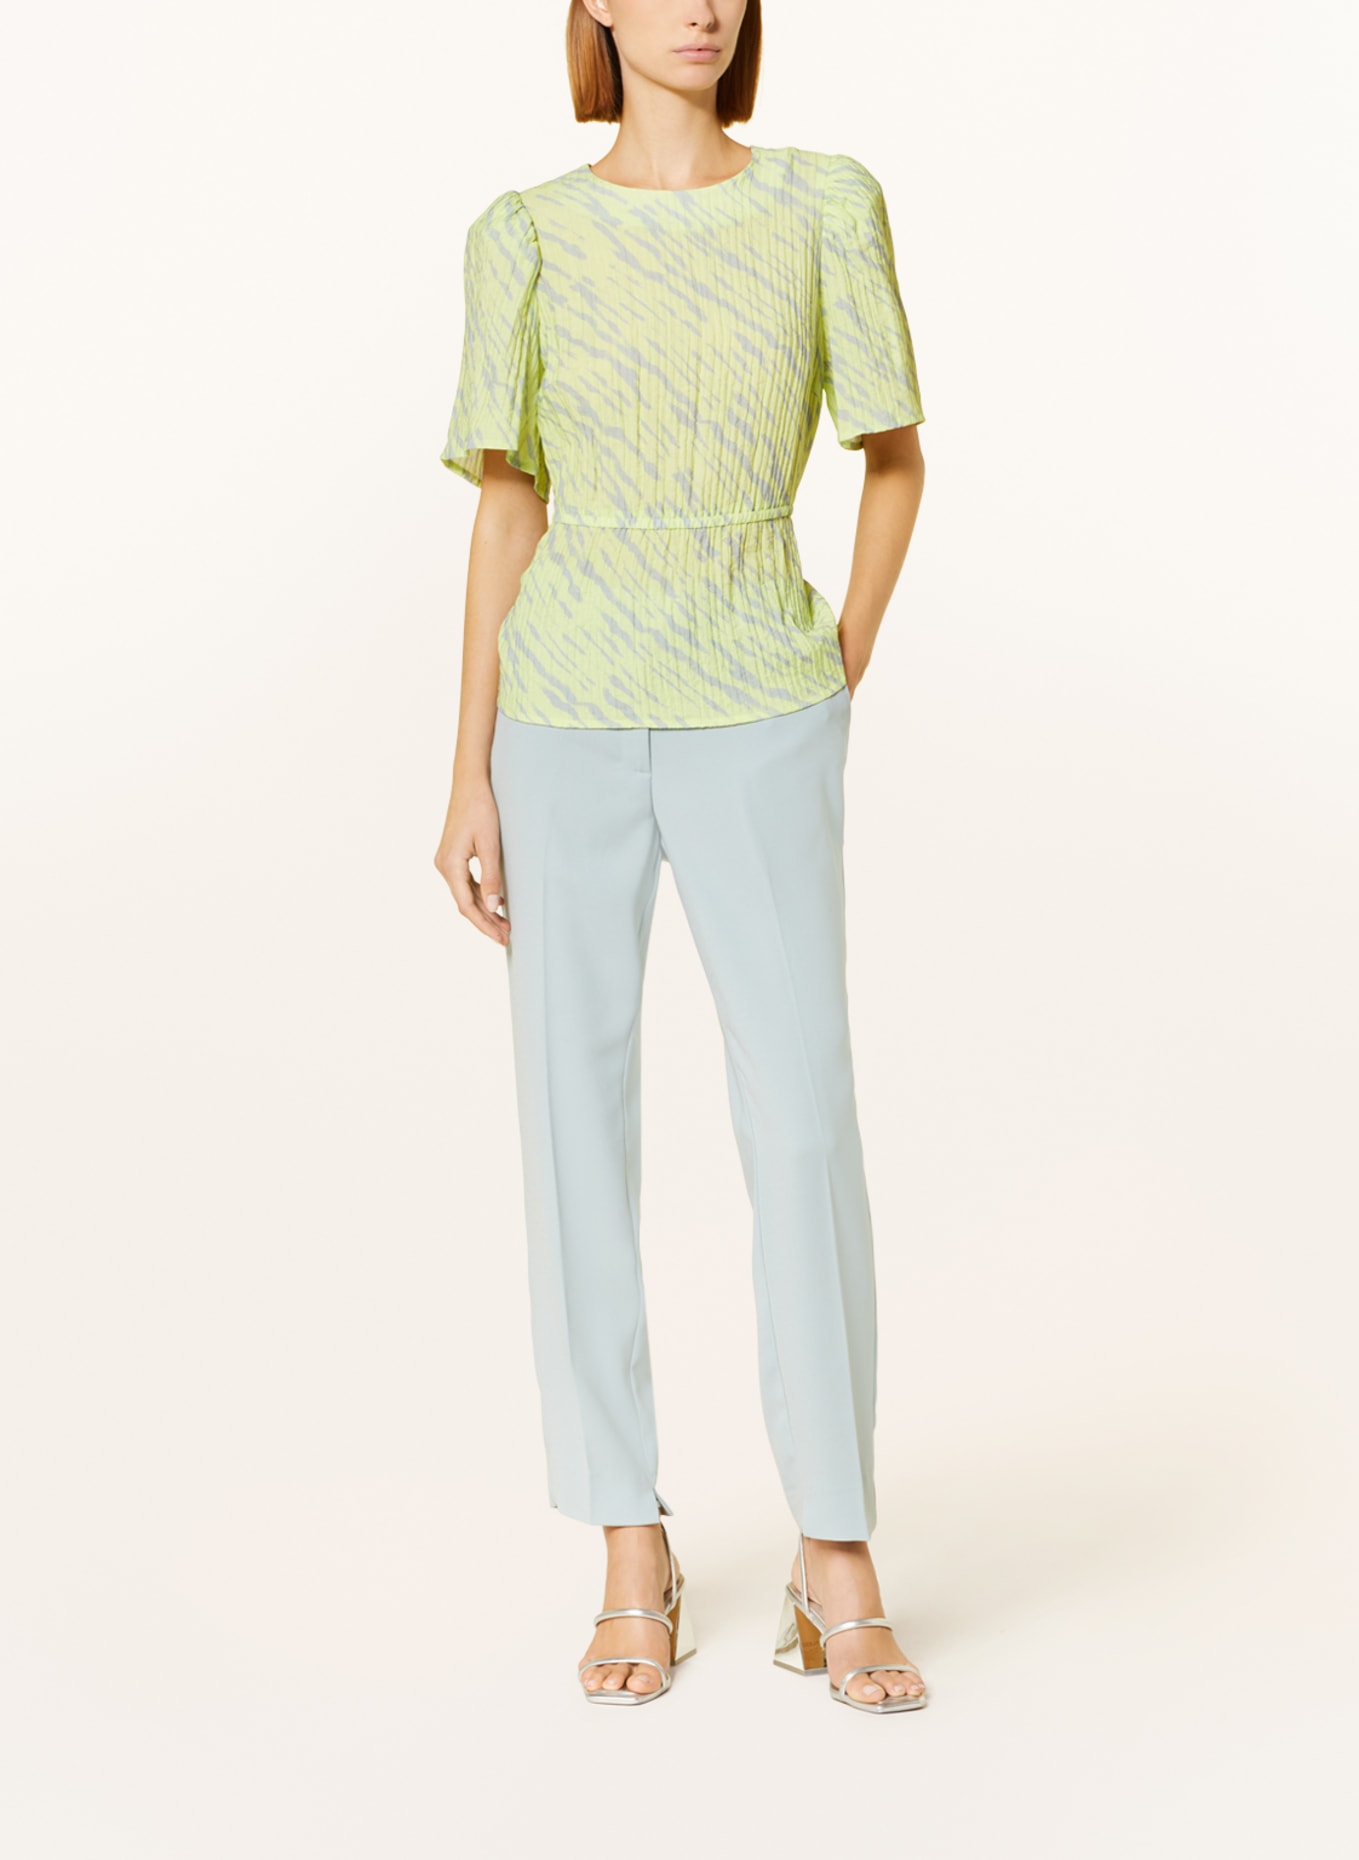 BEAUMONT Shirt blouse ISLA with cut-out, Color: LIGHT GREEN/ BLUE GRAY (Image 2)